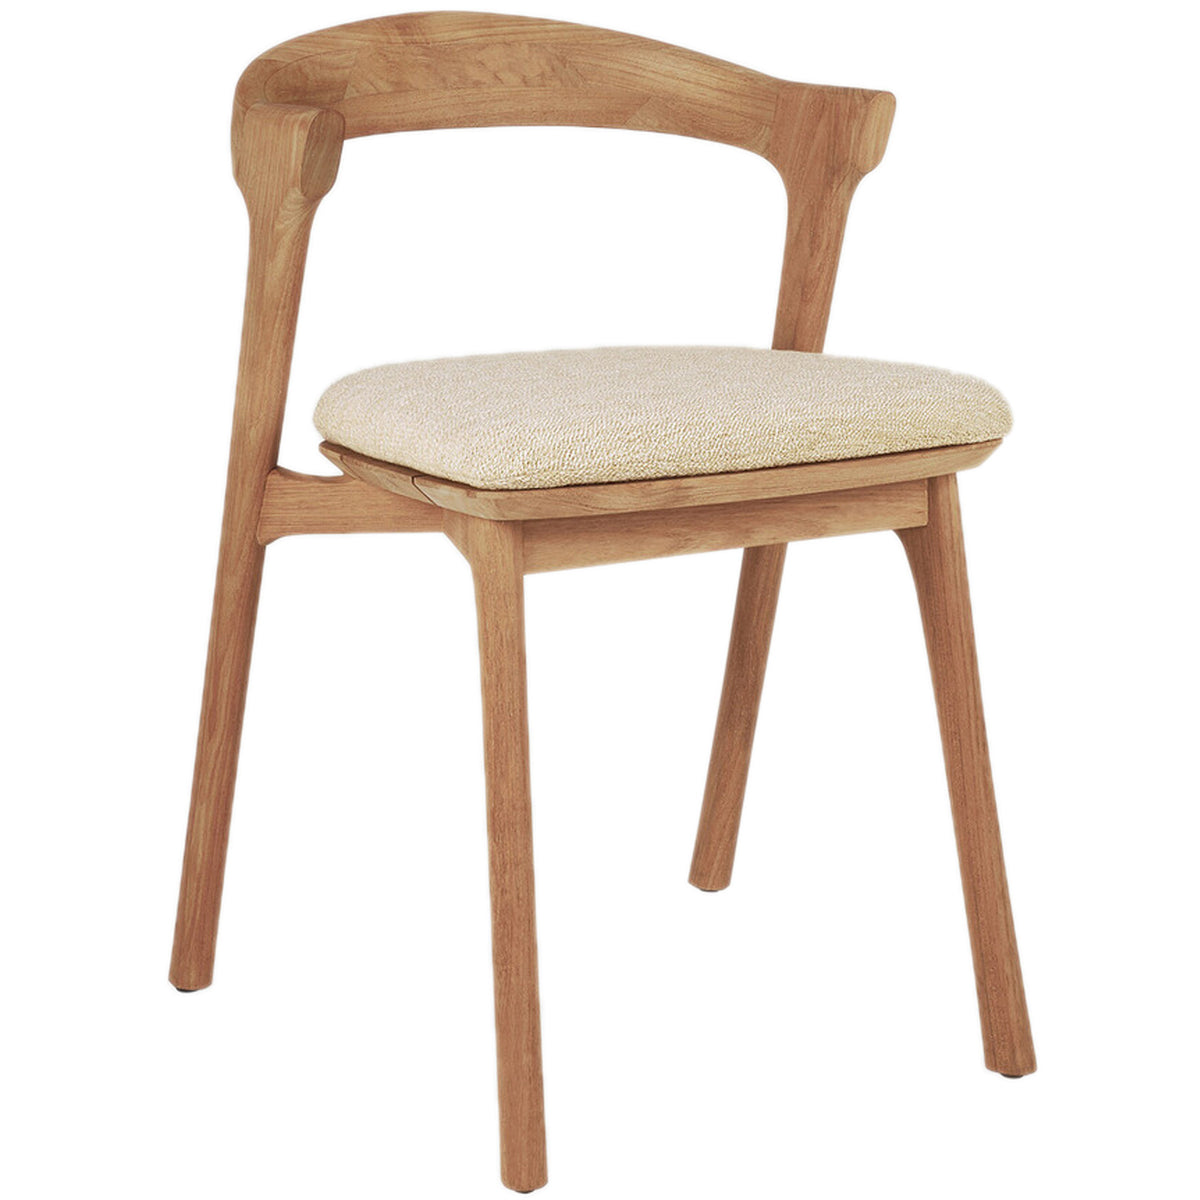 Bok Teak Outdoor Dining Chair With Cushion